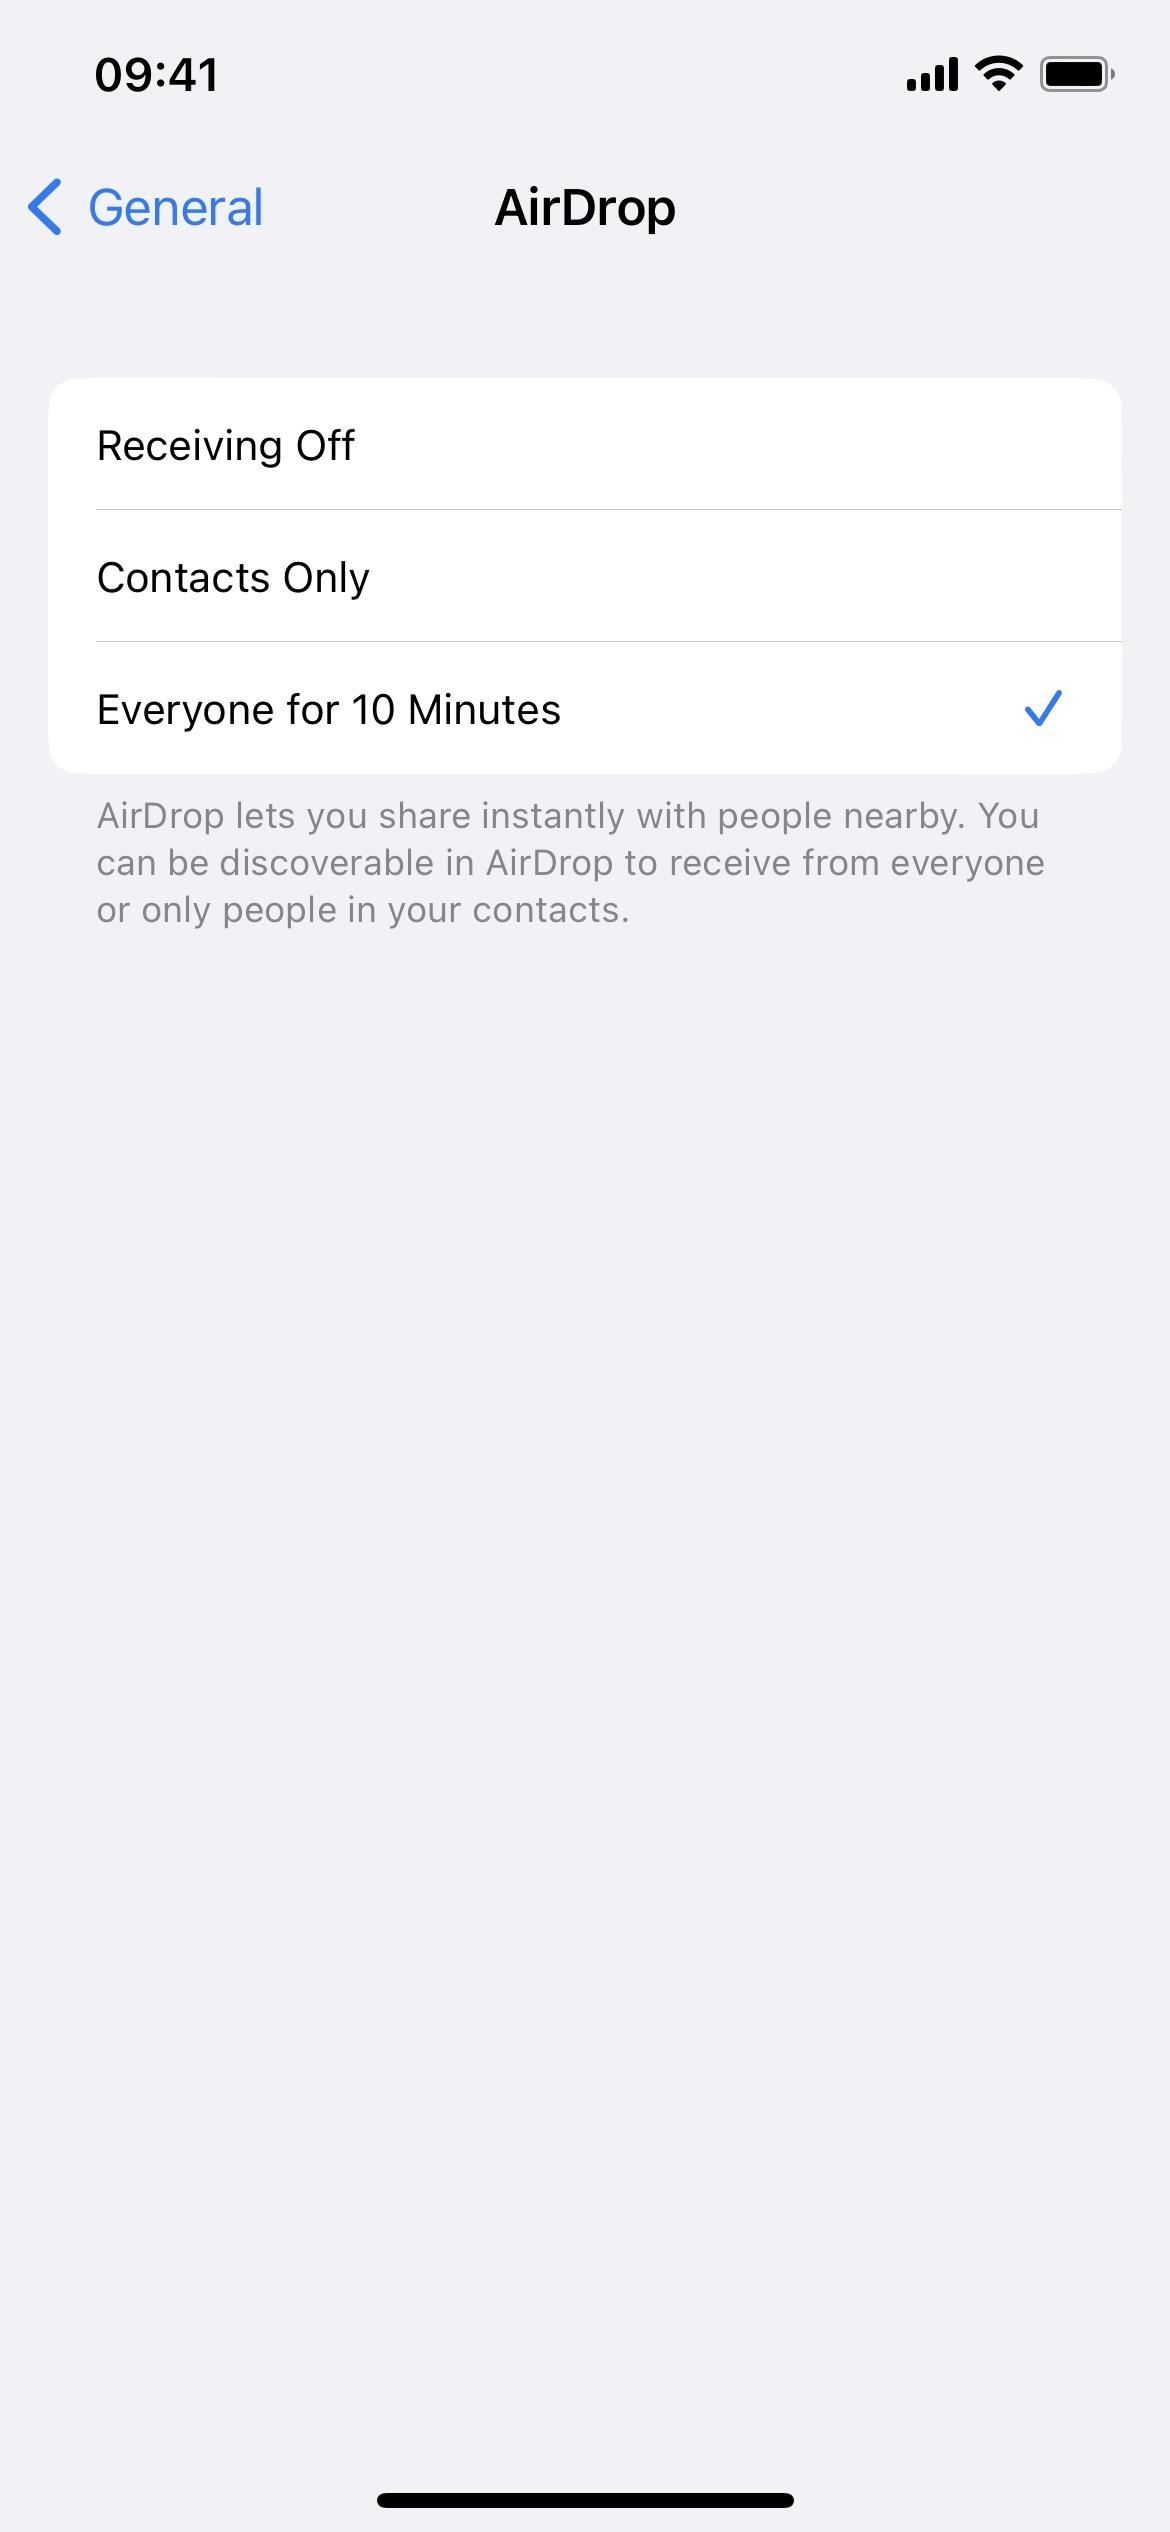 14 New Privacy and Security Features You Should Start Using on Your iPhone ASAP